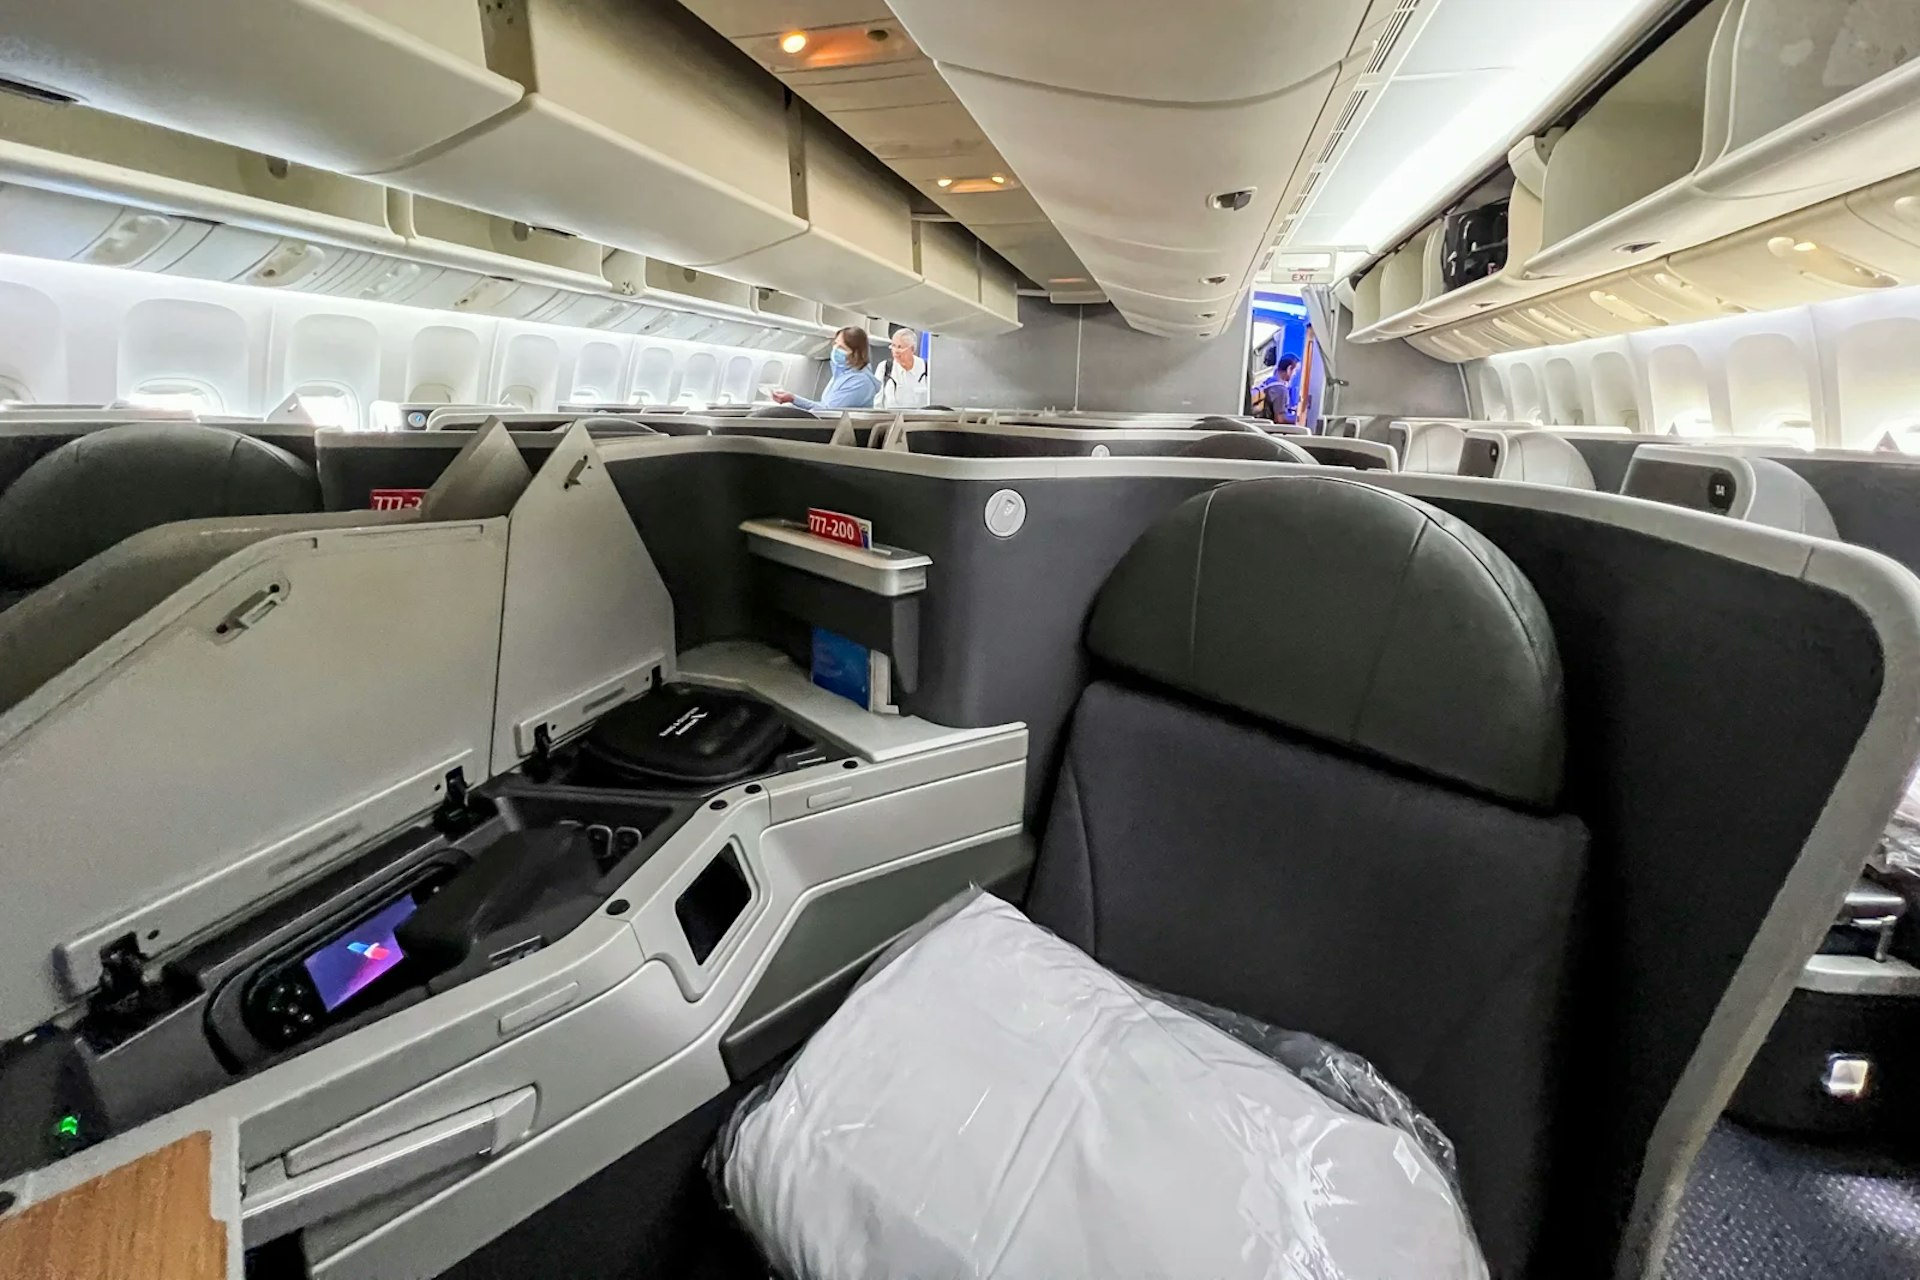 The American Airlines Business Class on a flight from Rome to JFK